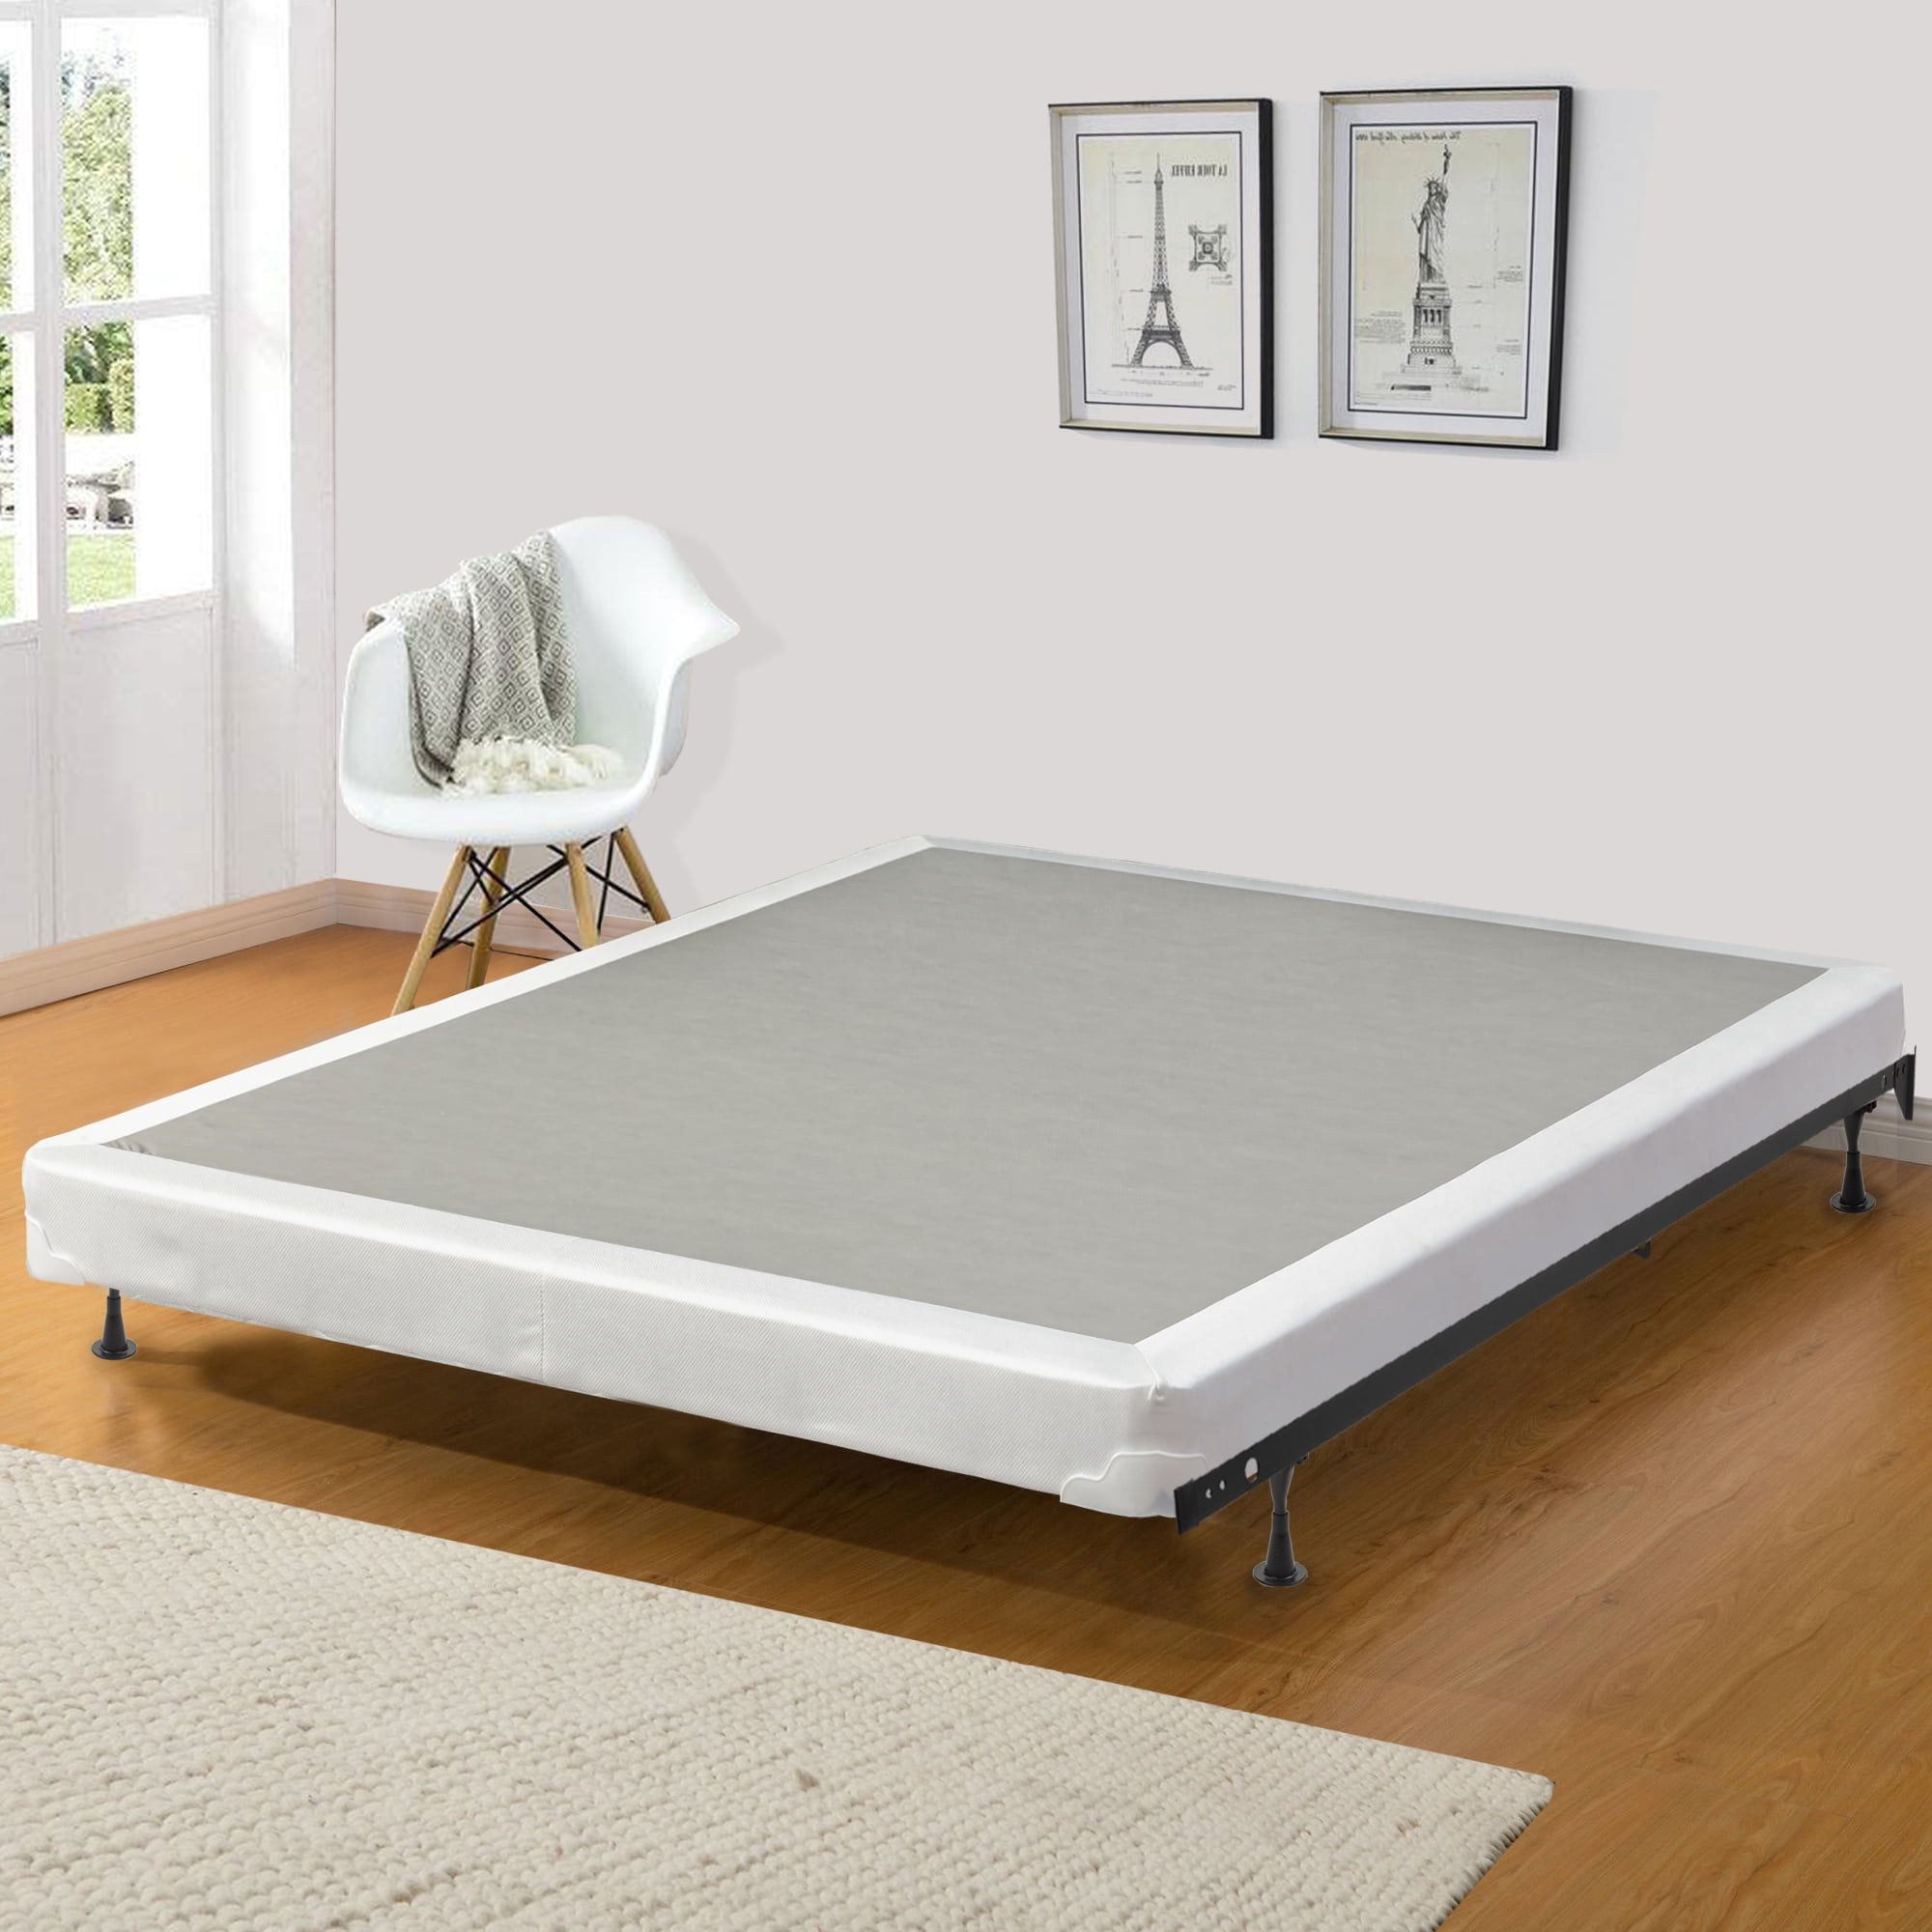 Gowtun 4 Inch Low Profile Wood Fully, Low Profile Wooden Bed Frame Queen